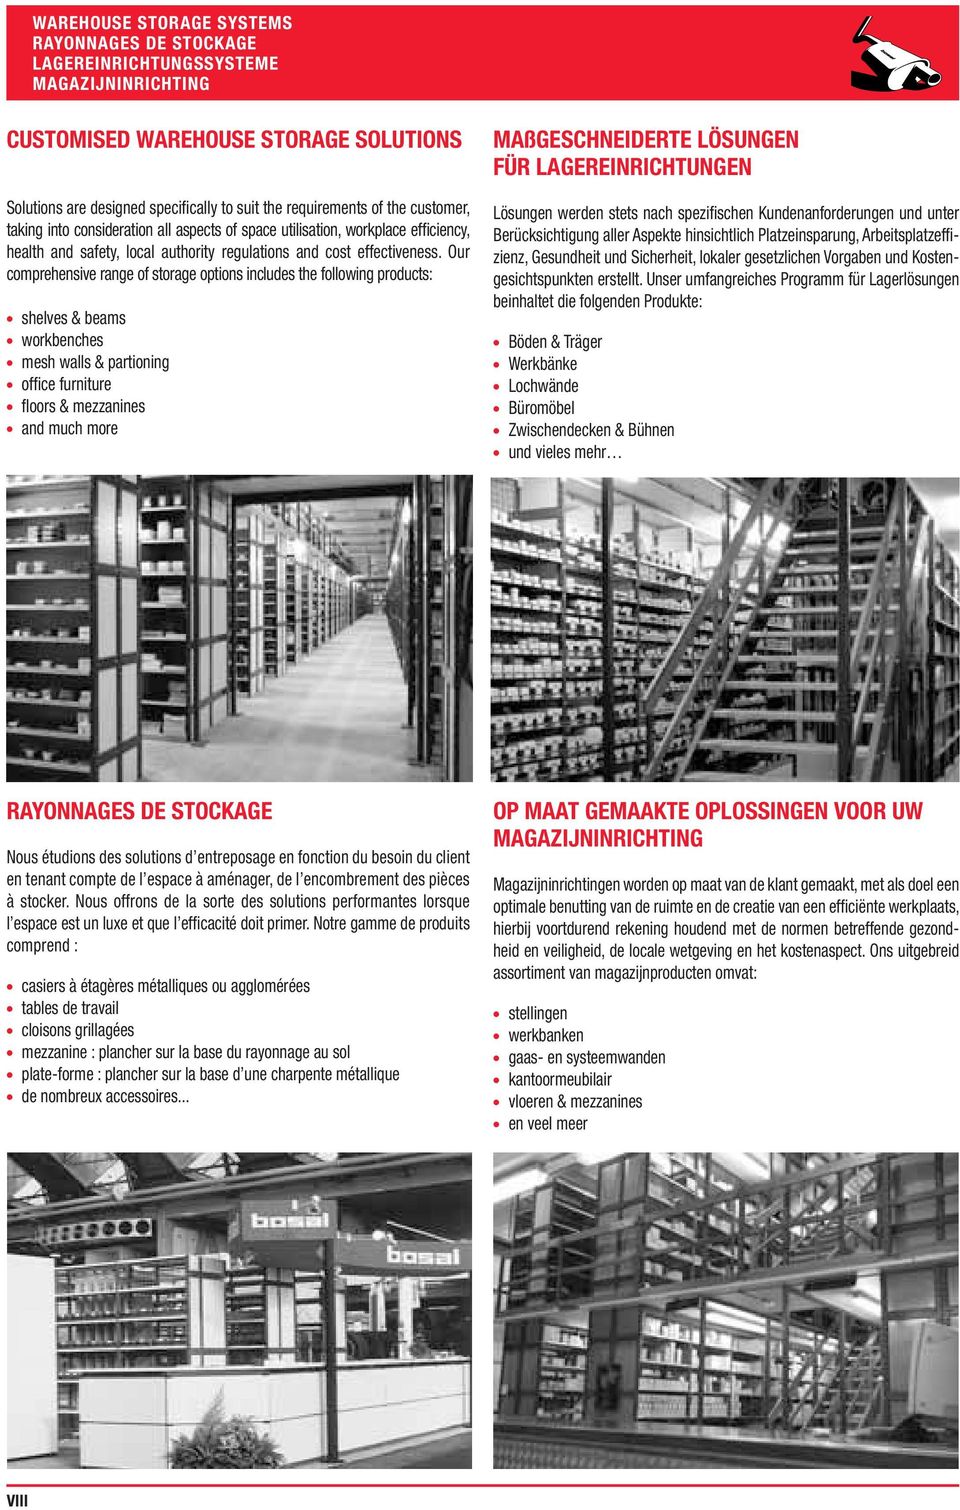 Our comprehensive range of storage options includes the following products: shelves & beams workbenches mesh walls & partioning offi ce furniture fl oors & mezzanines and much more MßGESHNEIERTE